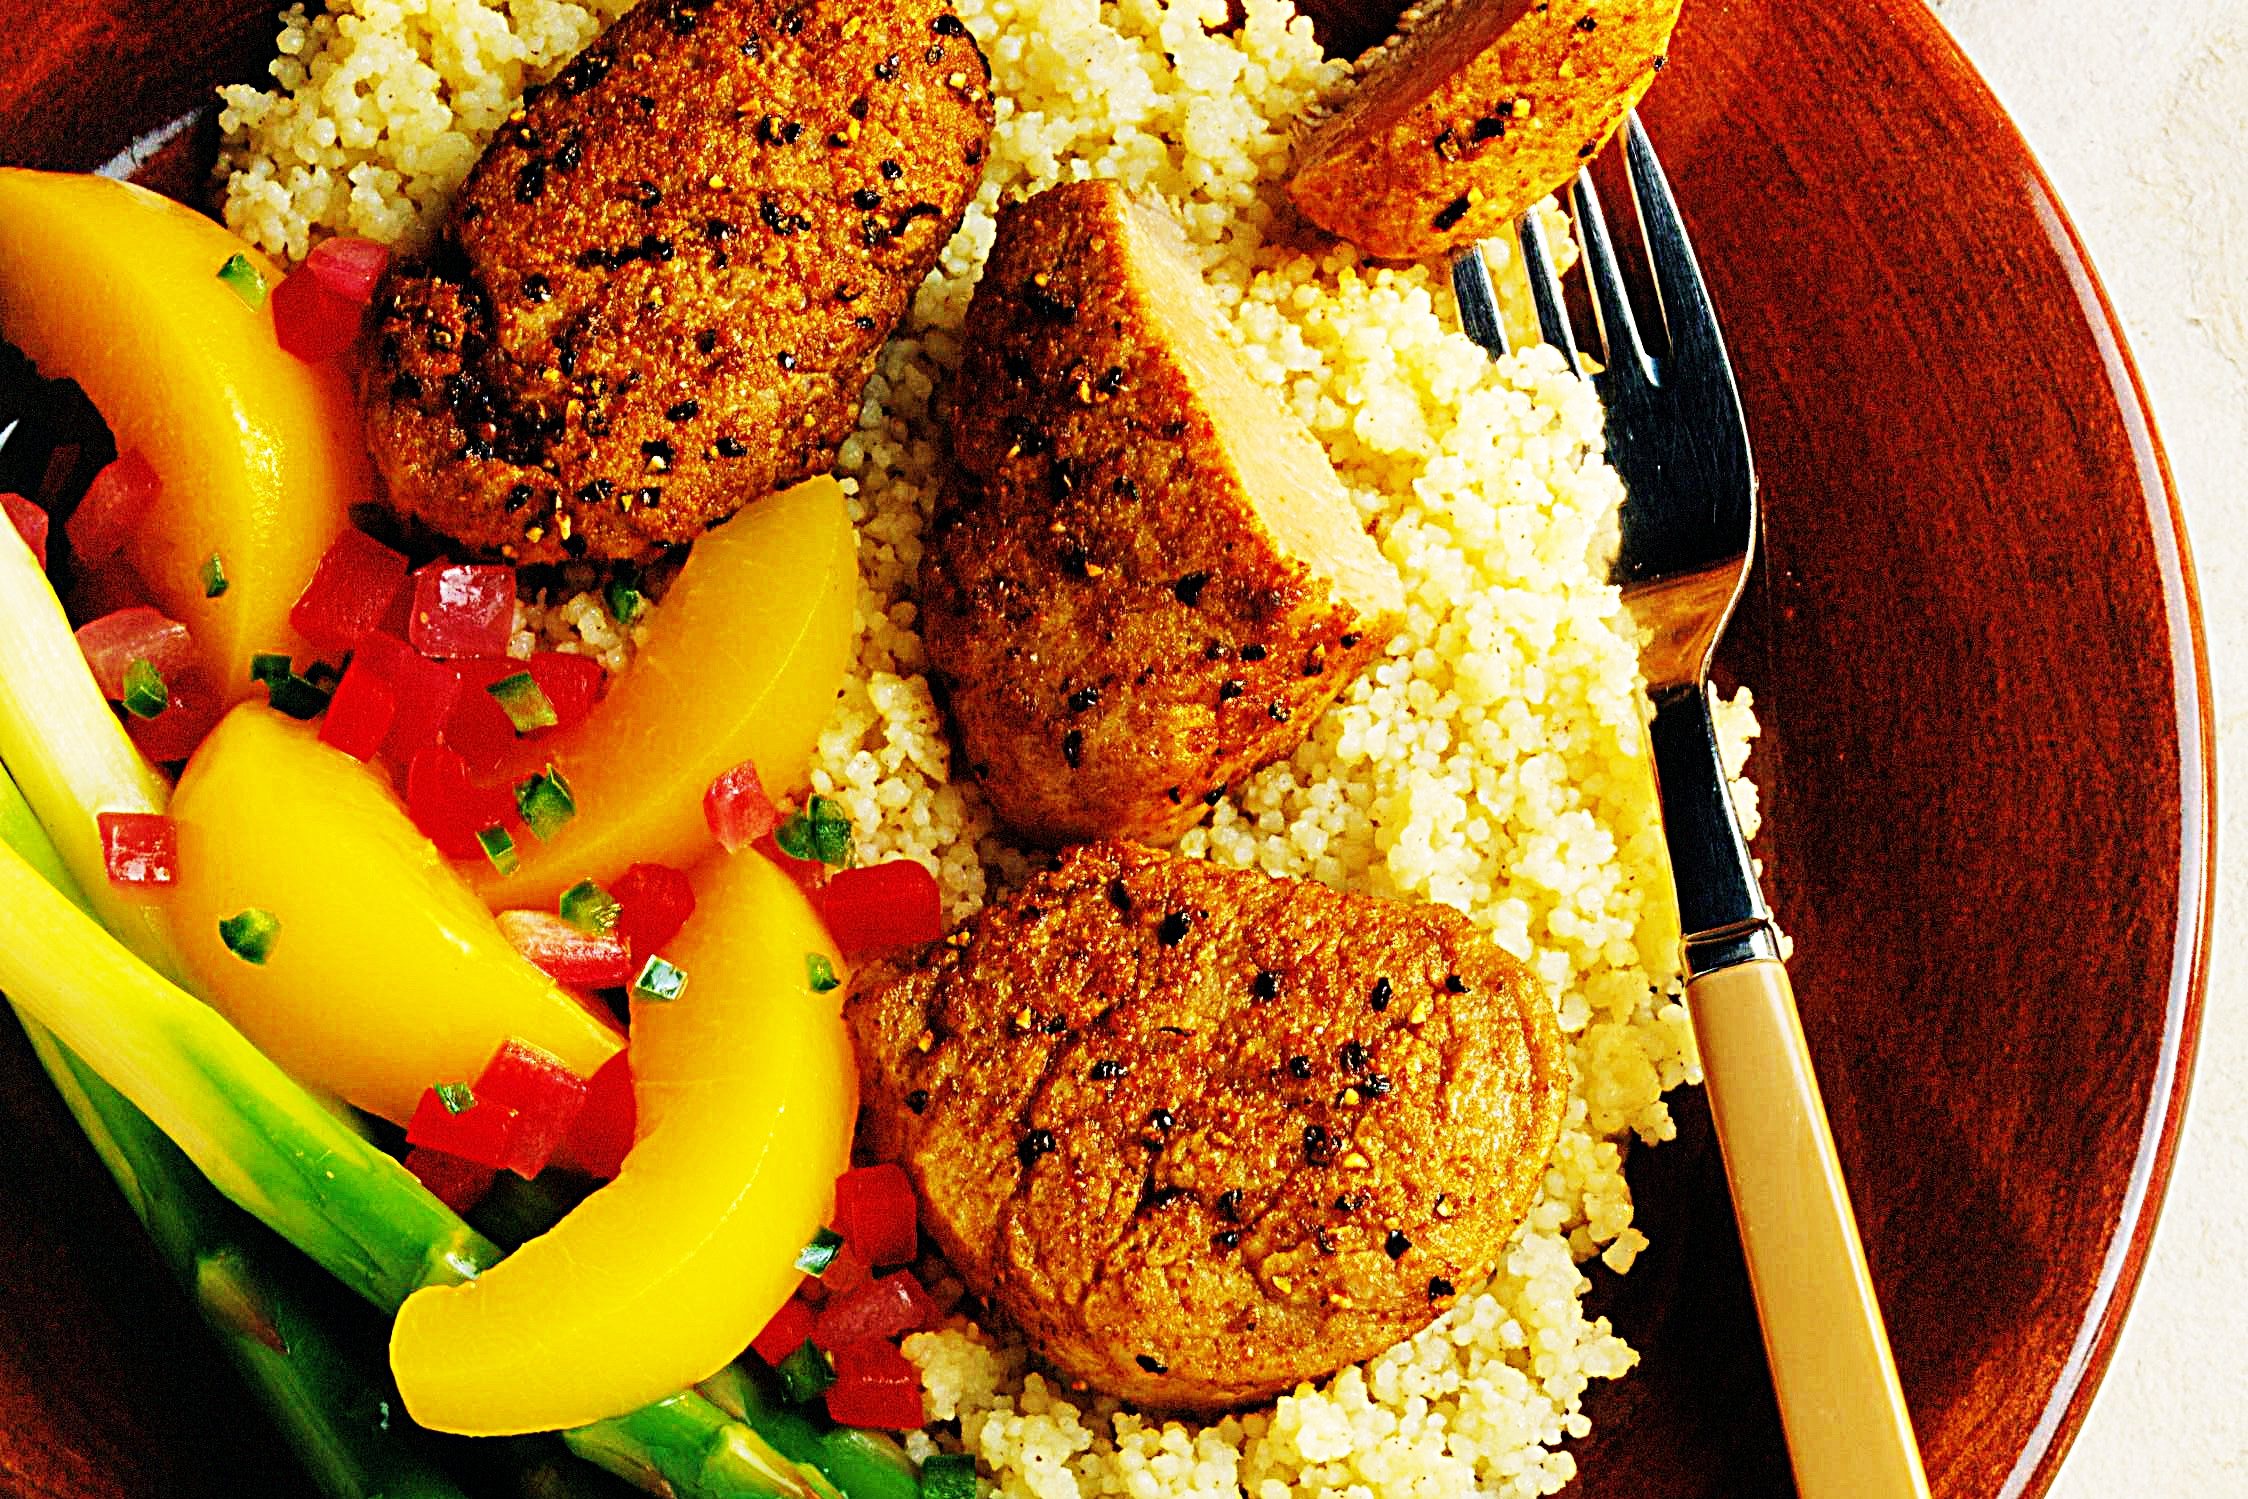 Stupid-Easy Recipe for Southwestern Pork Medallions with Cinnamon Couscous & Peach Chutney (#1 Top-Rated)